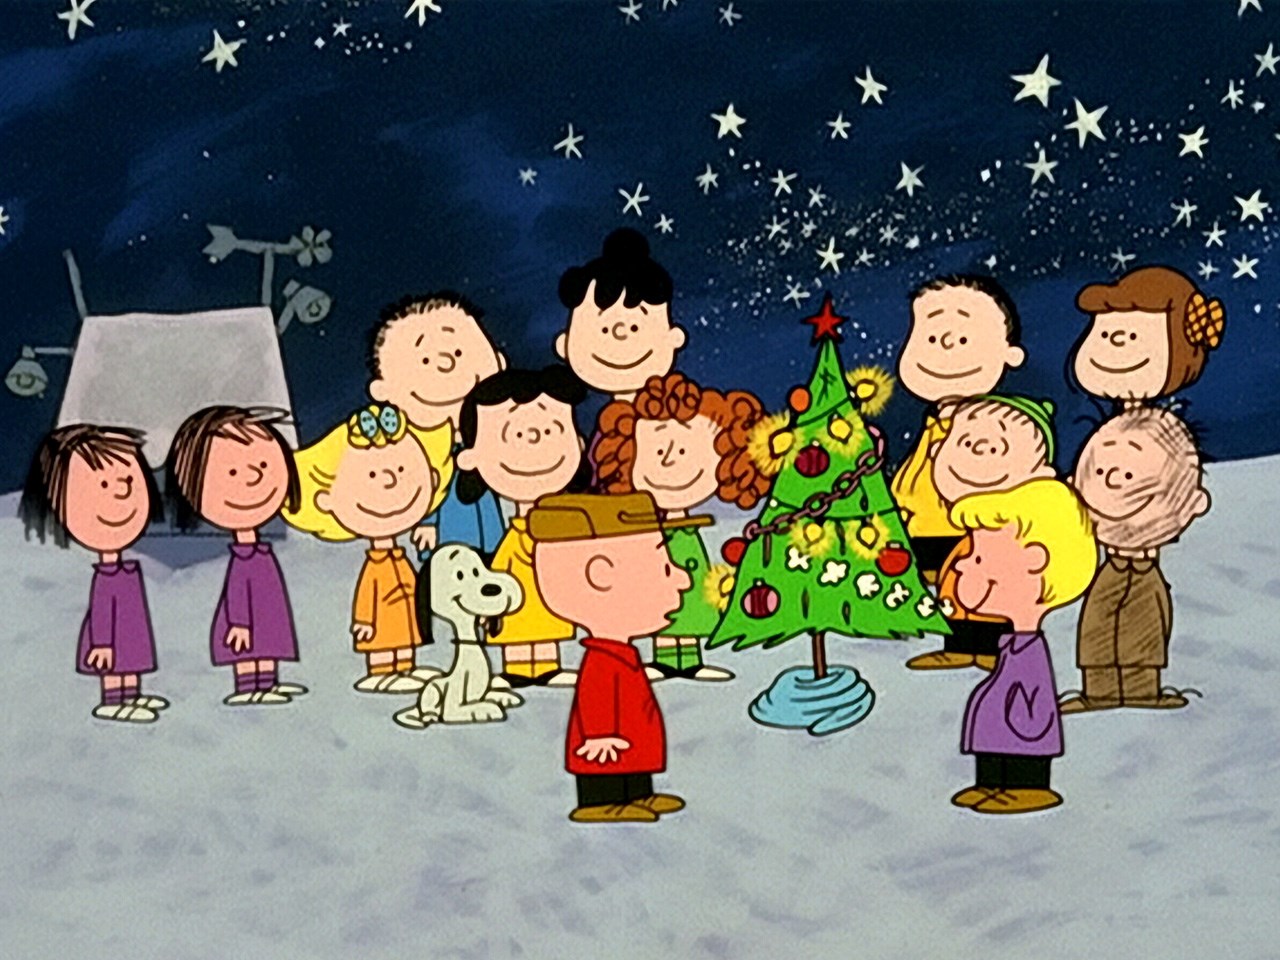 Charlie Brown Lucy Snoopy Sally Woodstock Ice Skating ChristmasTime Is Here Card 